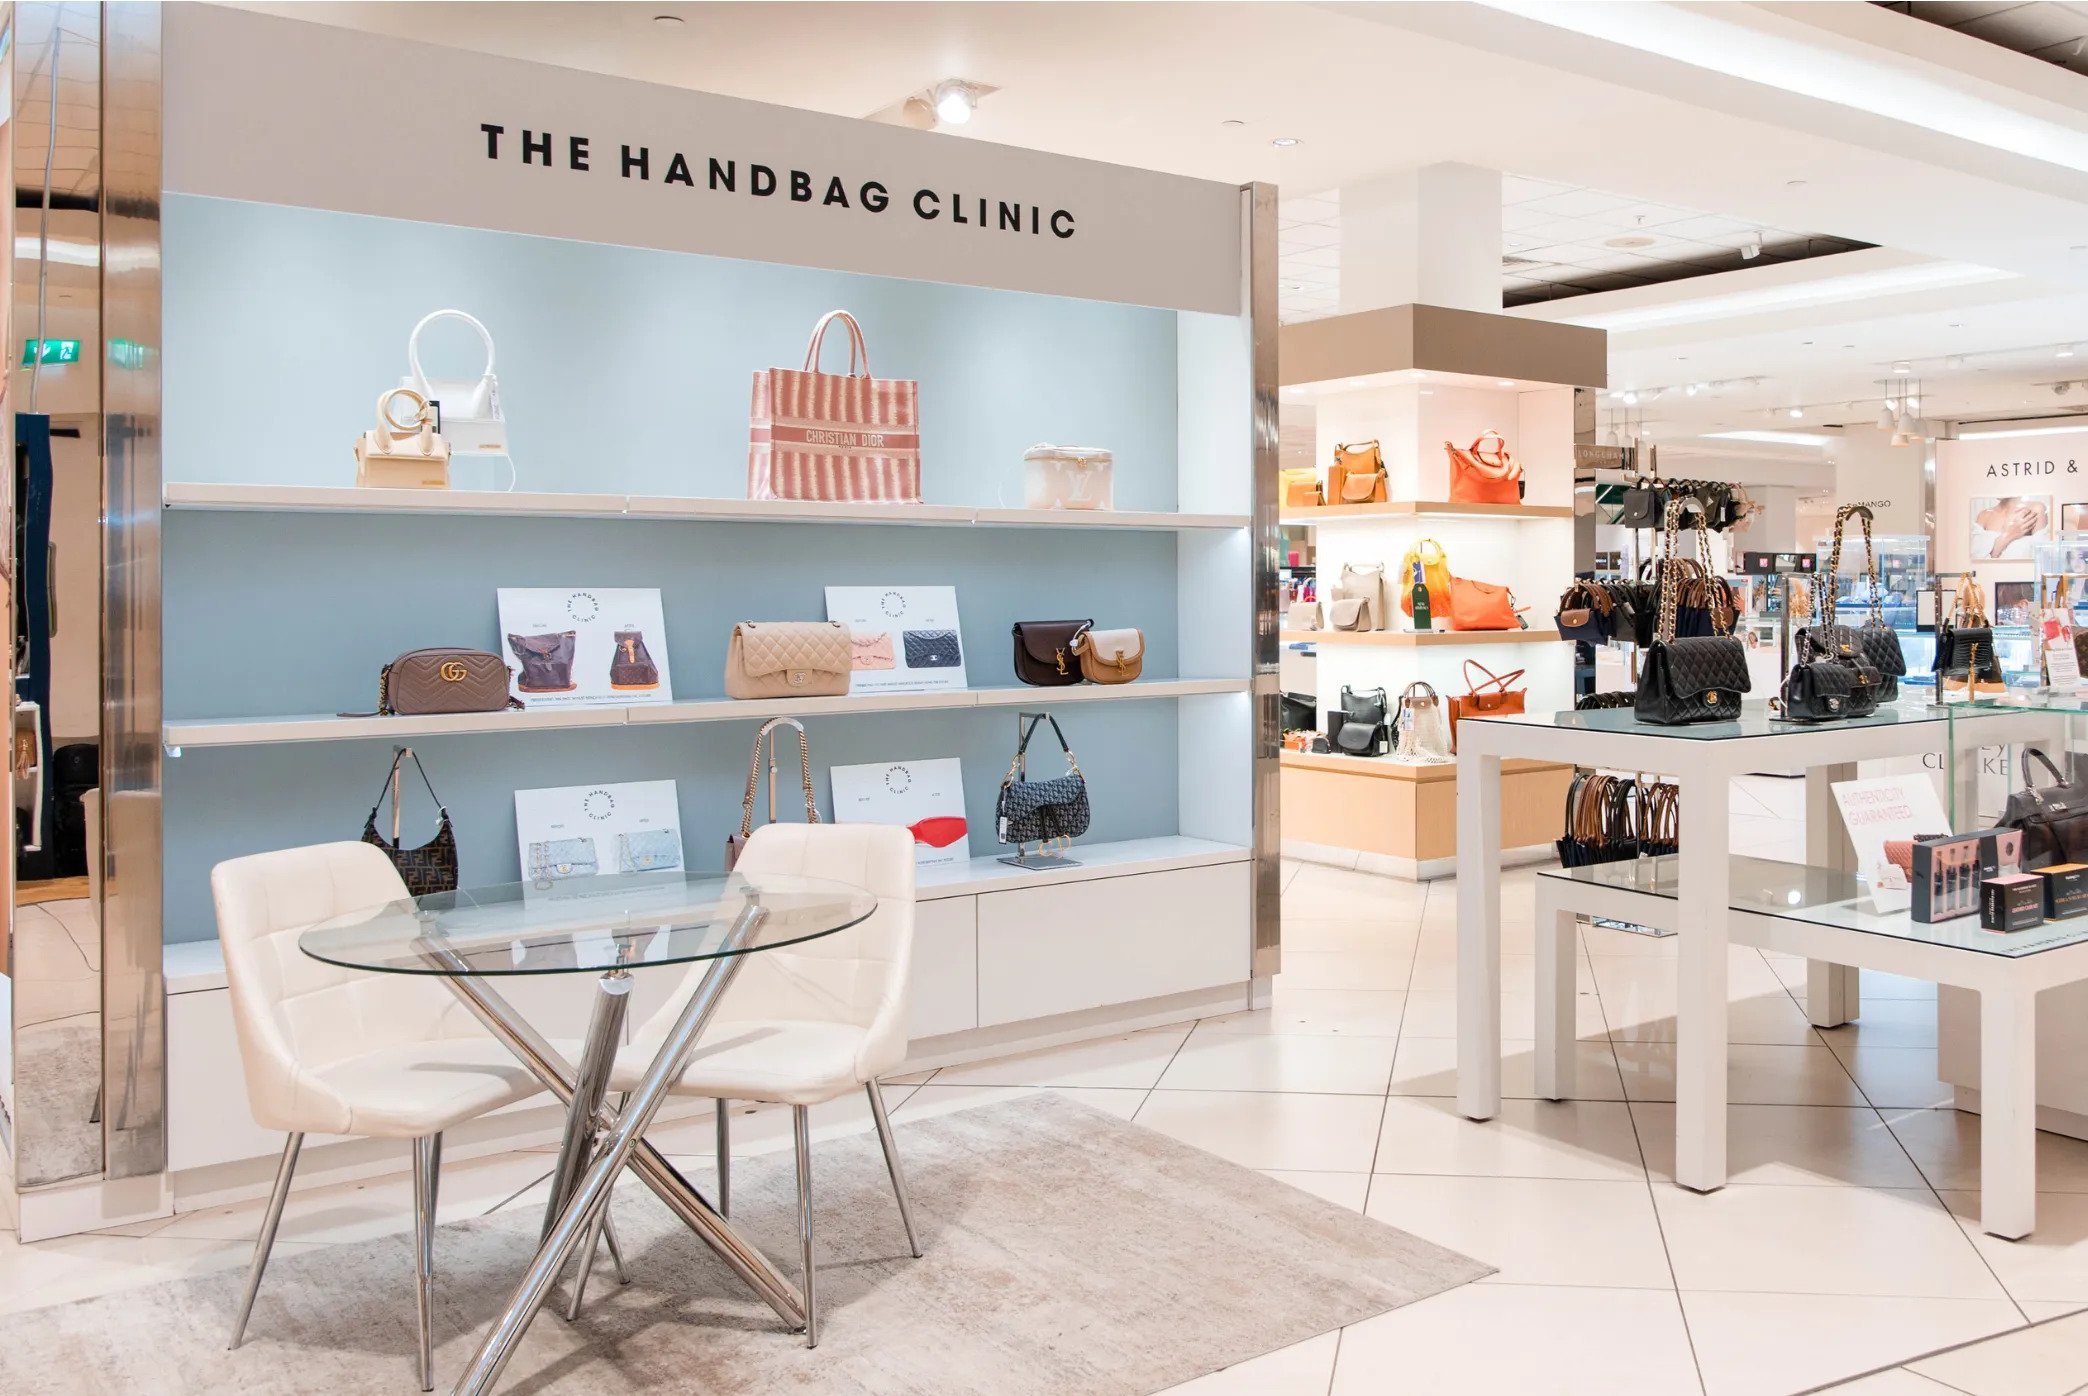 the handbag clinic has now opened in York